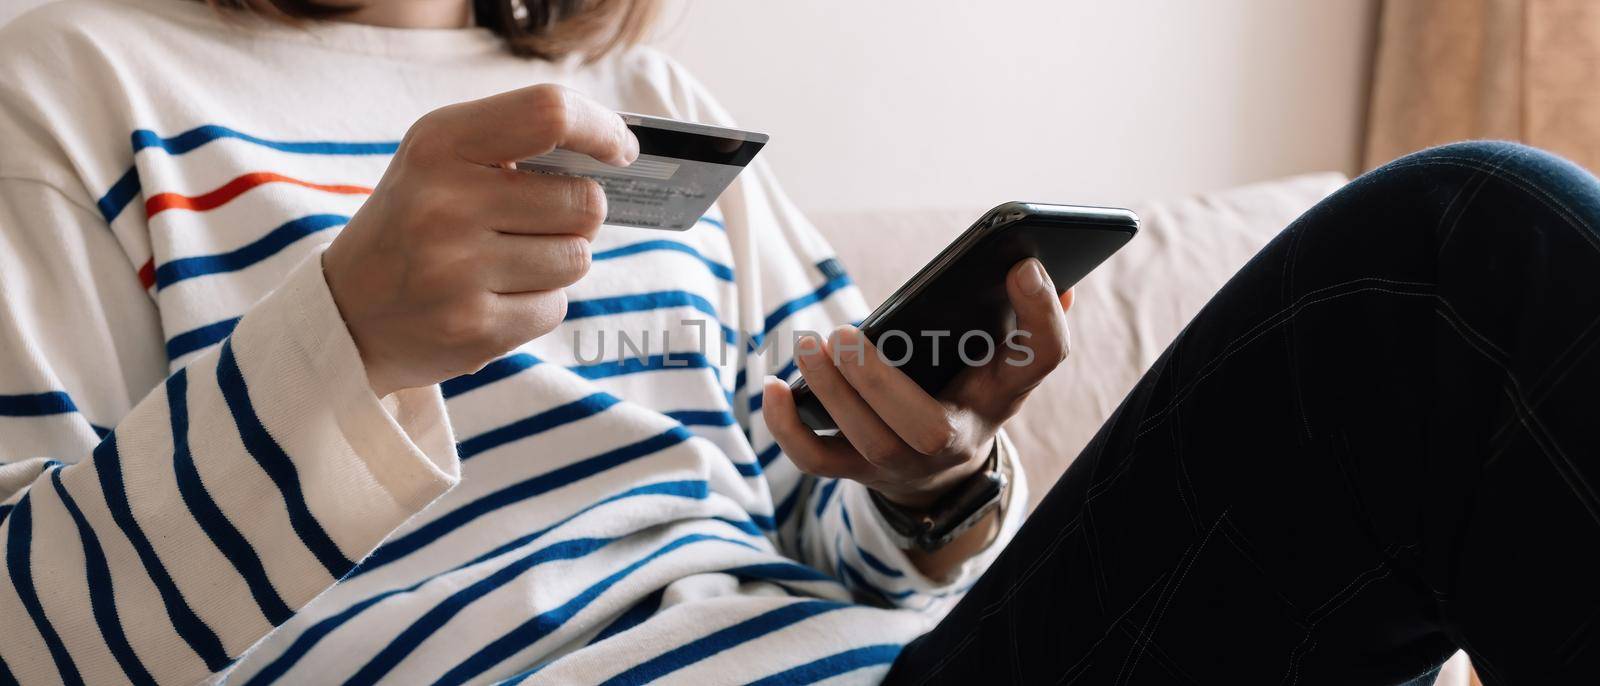 Online shopping payment,Woman's hands holding a smart phone and credit card and for online shopping at home.